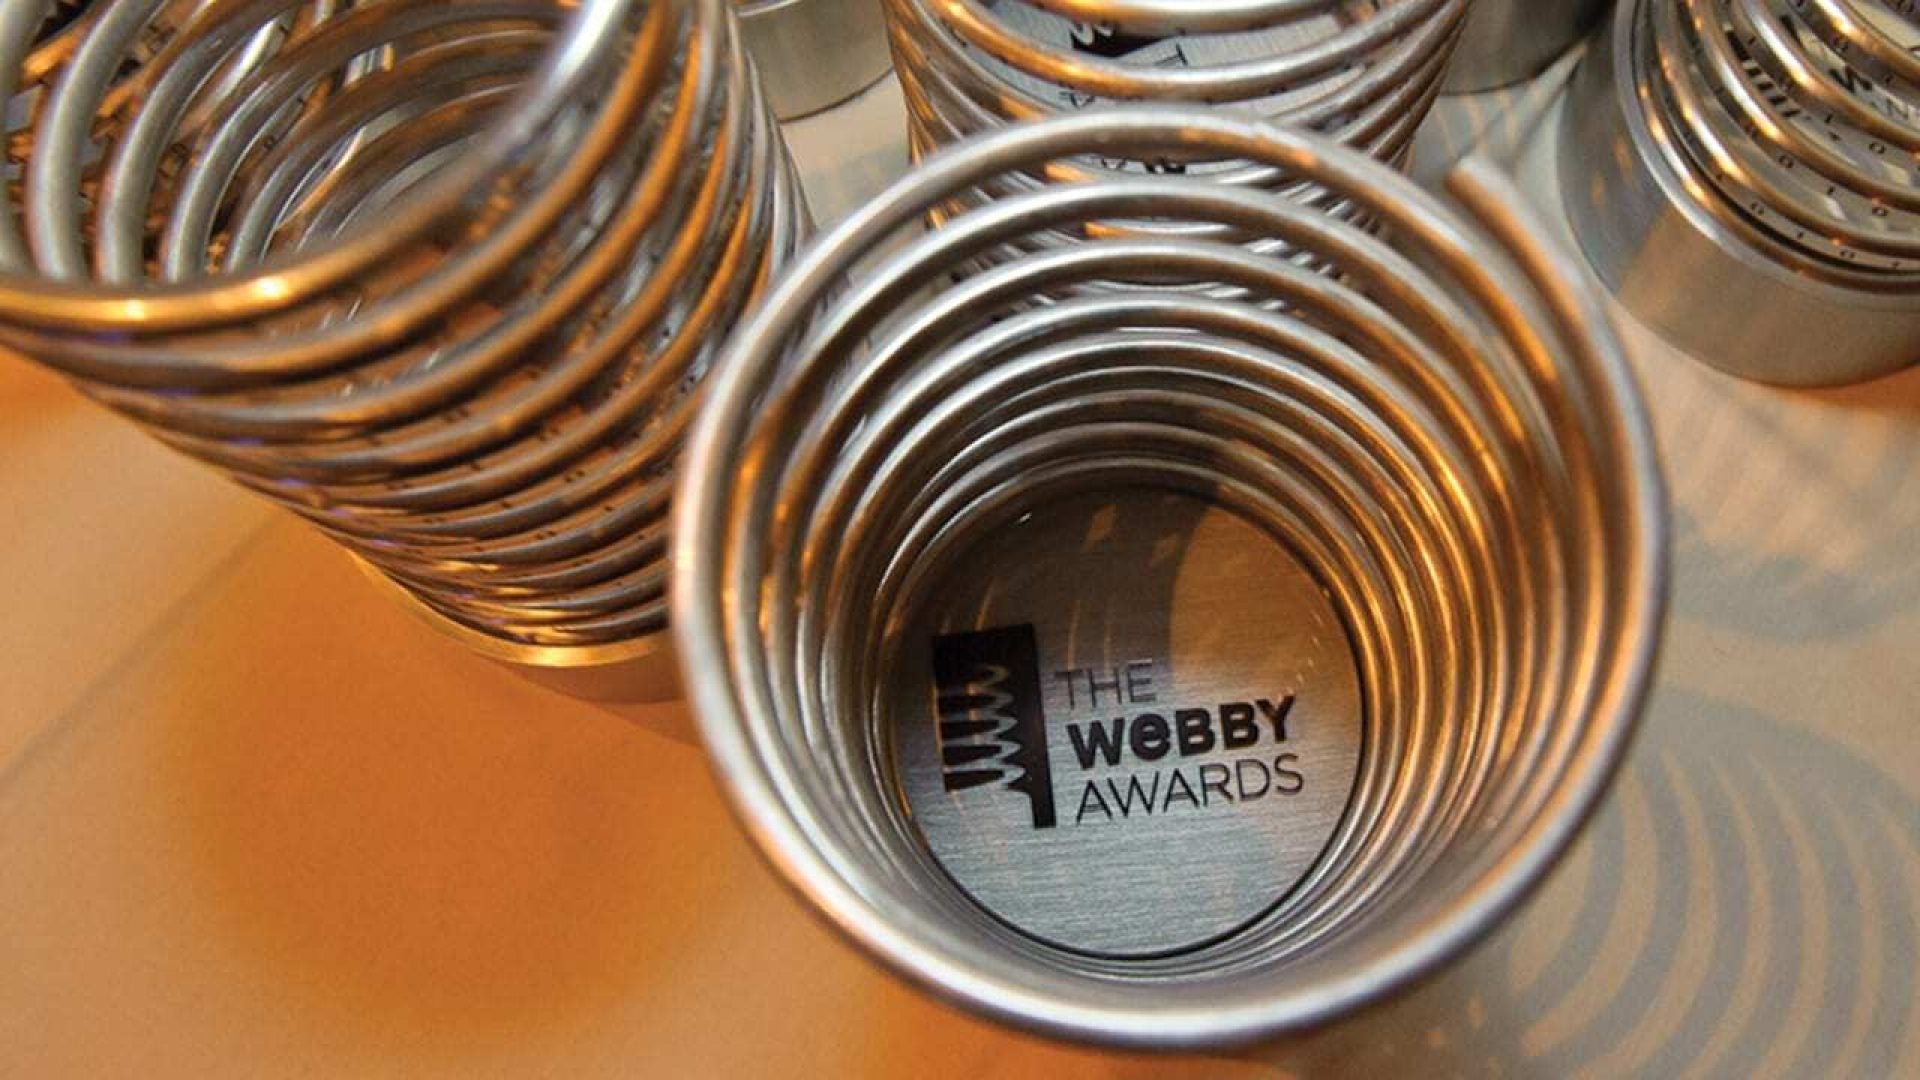 Vote Now for ESSENCE to Win a Webby Award!